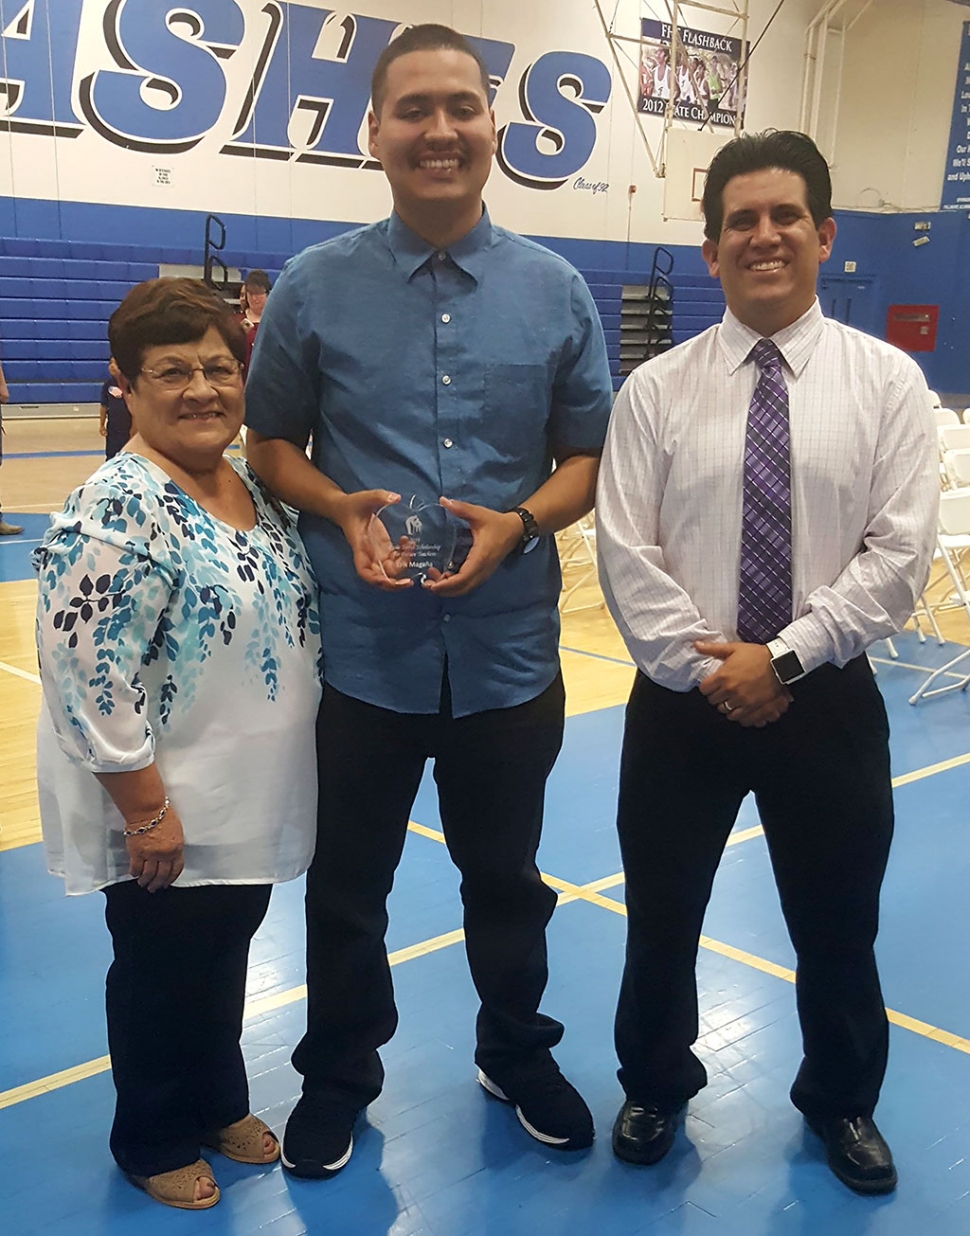 On May 29th, Fillmore High School Senior Erik Magana (center) was presented the Rosie Torres Scholarship for Future Teachers by both Rosie and Michael Torres at the campus awards ceremony. Photo courtesy Ralph Flores.